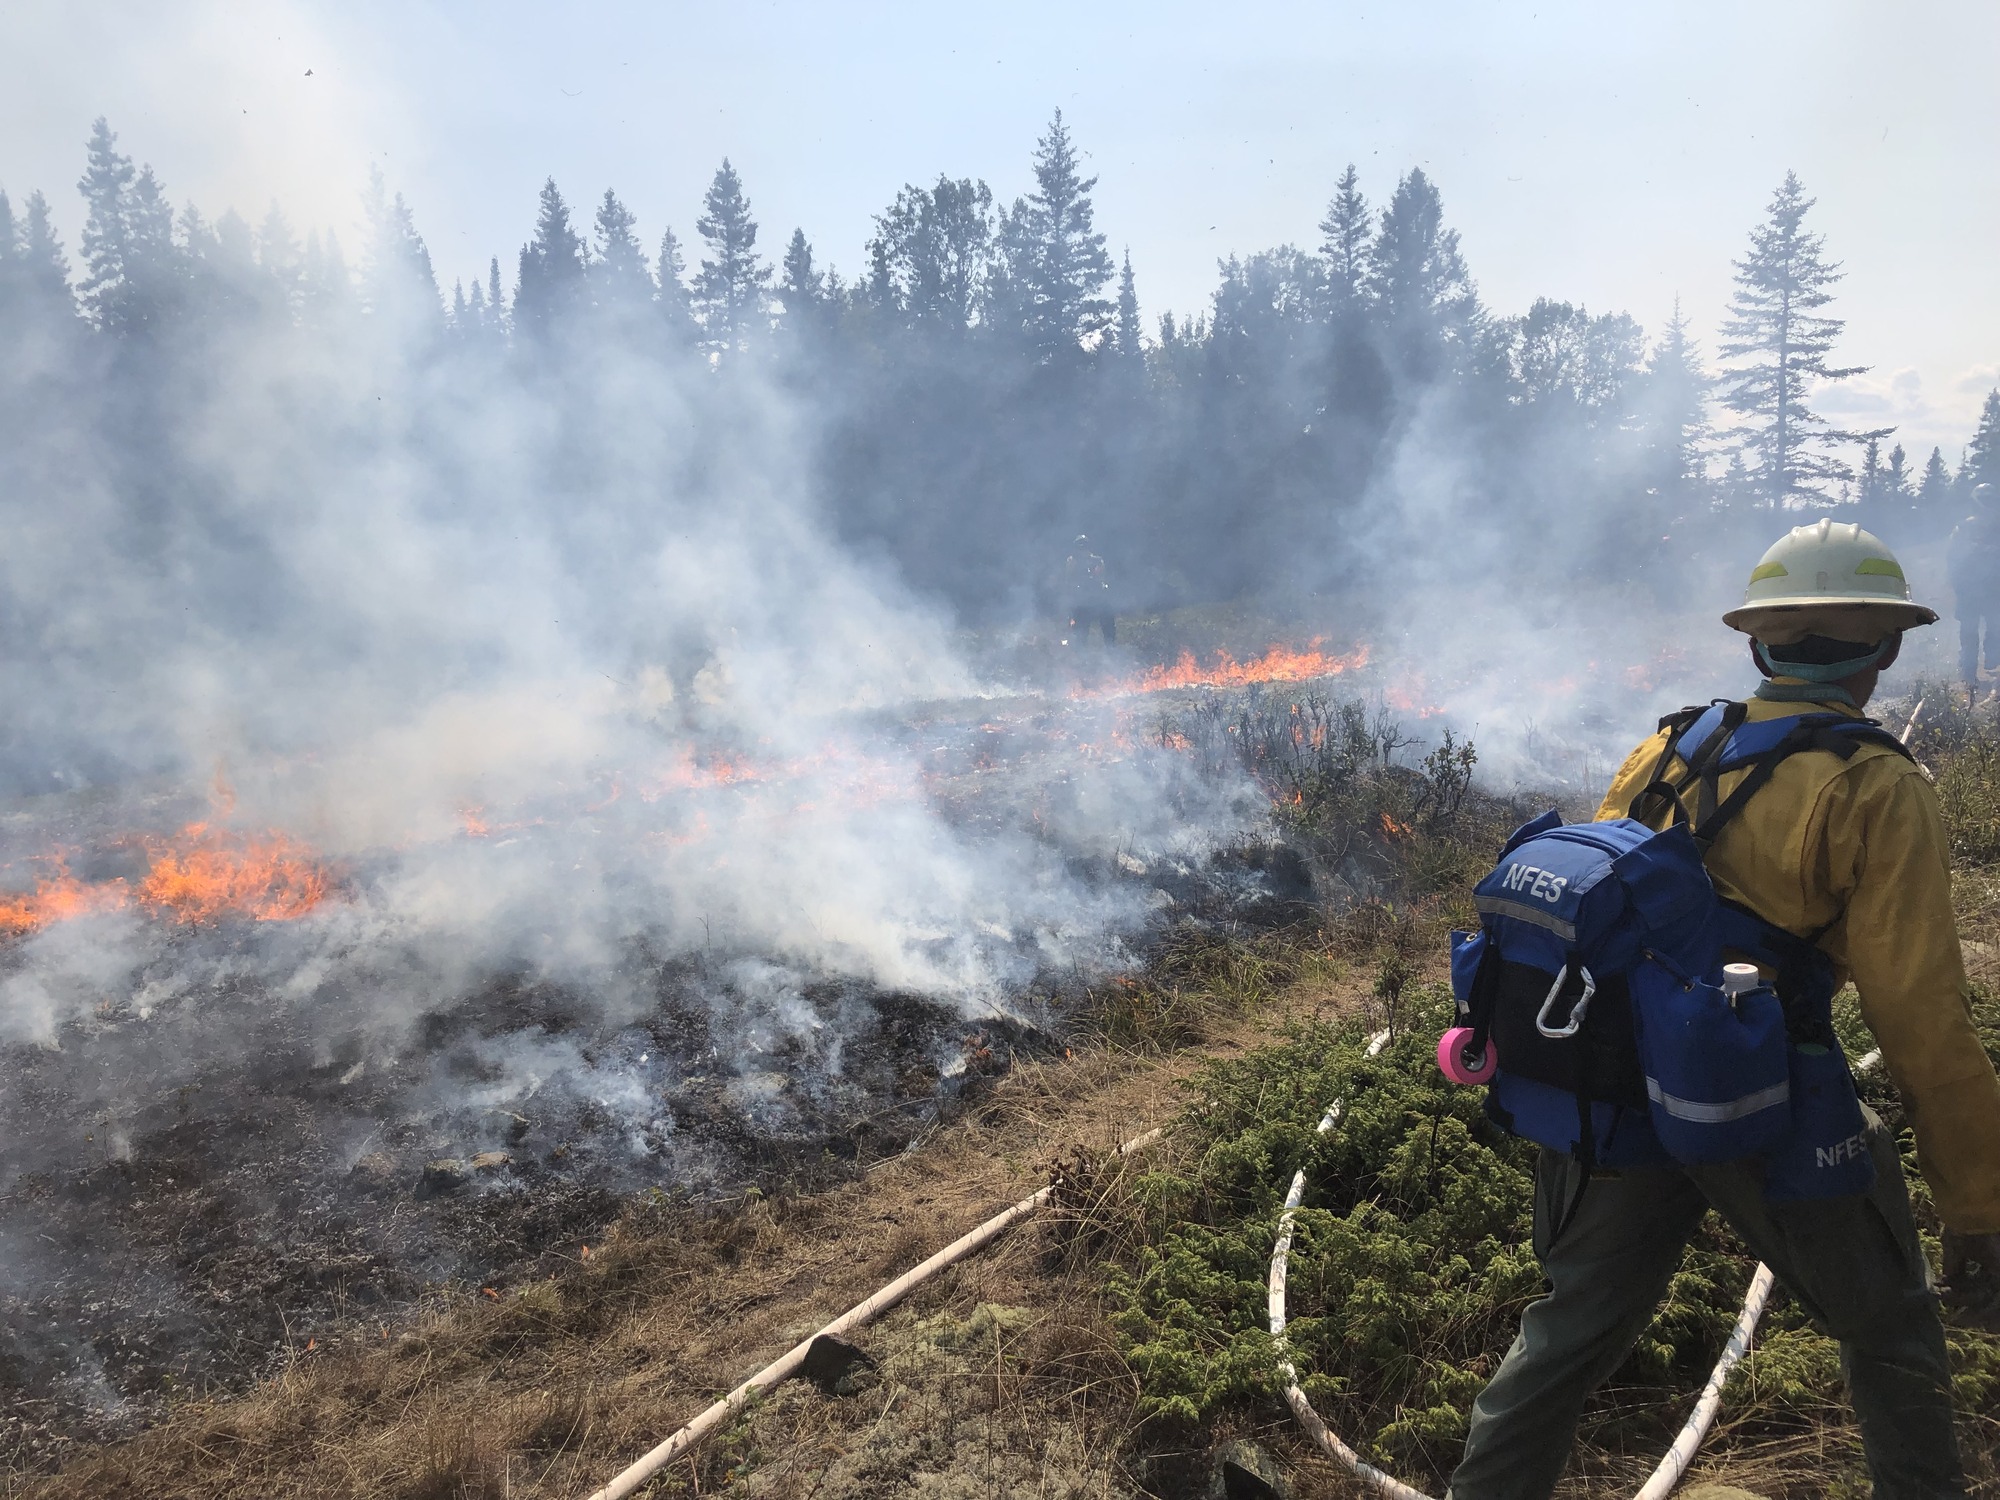 A firefighter wearing a white hardhat, yellow shirt, and blue fire pack walks with a firehose along a smoldering brush fire.